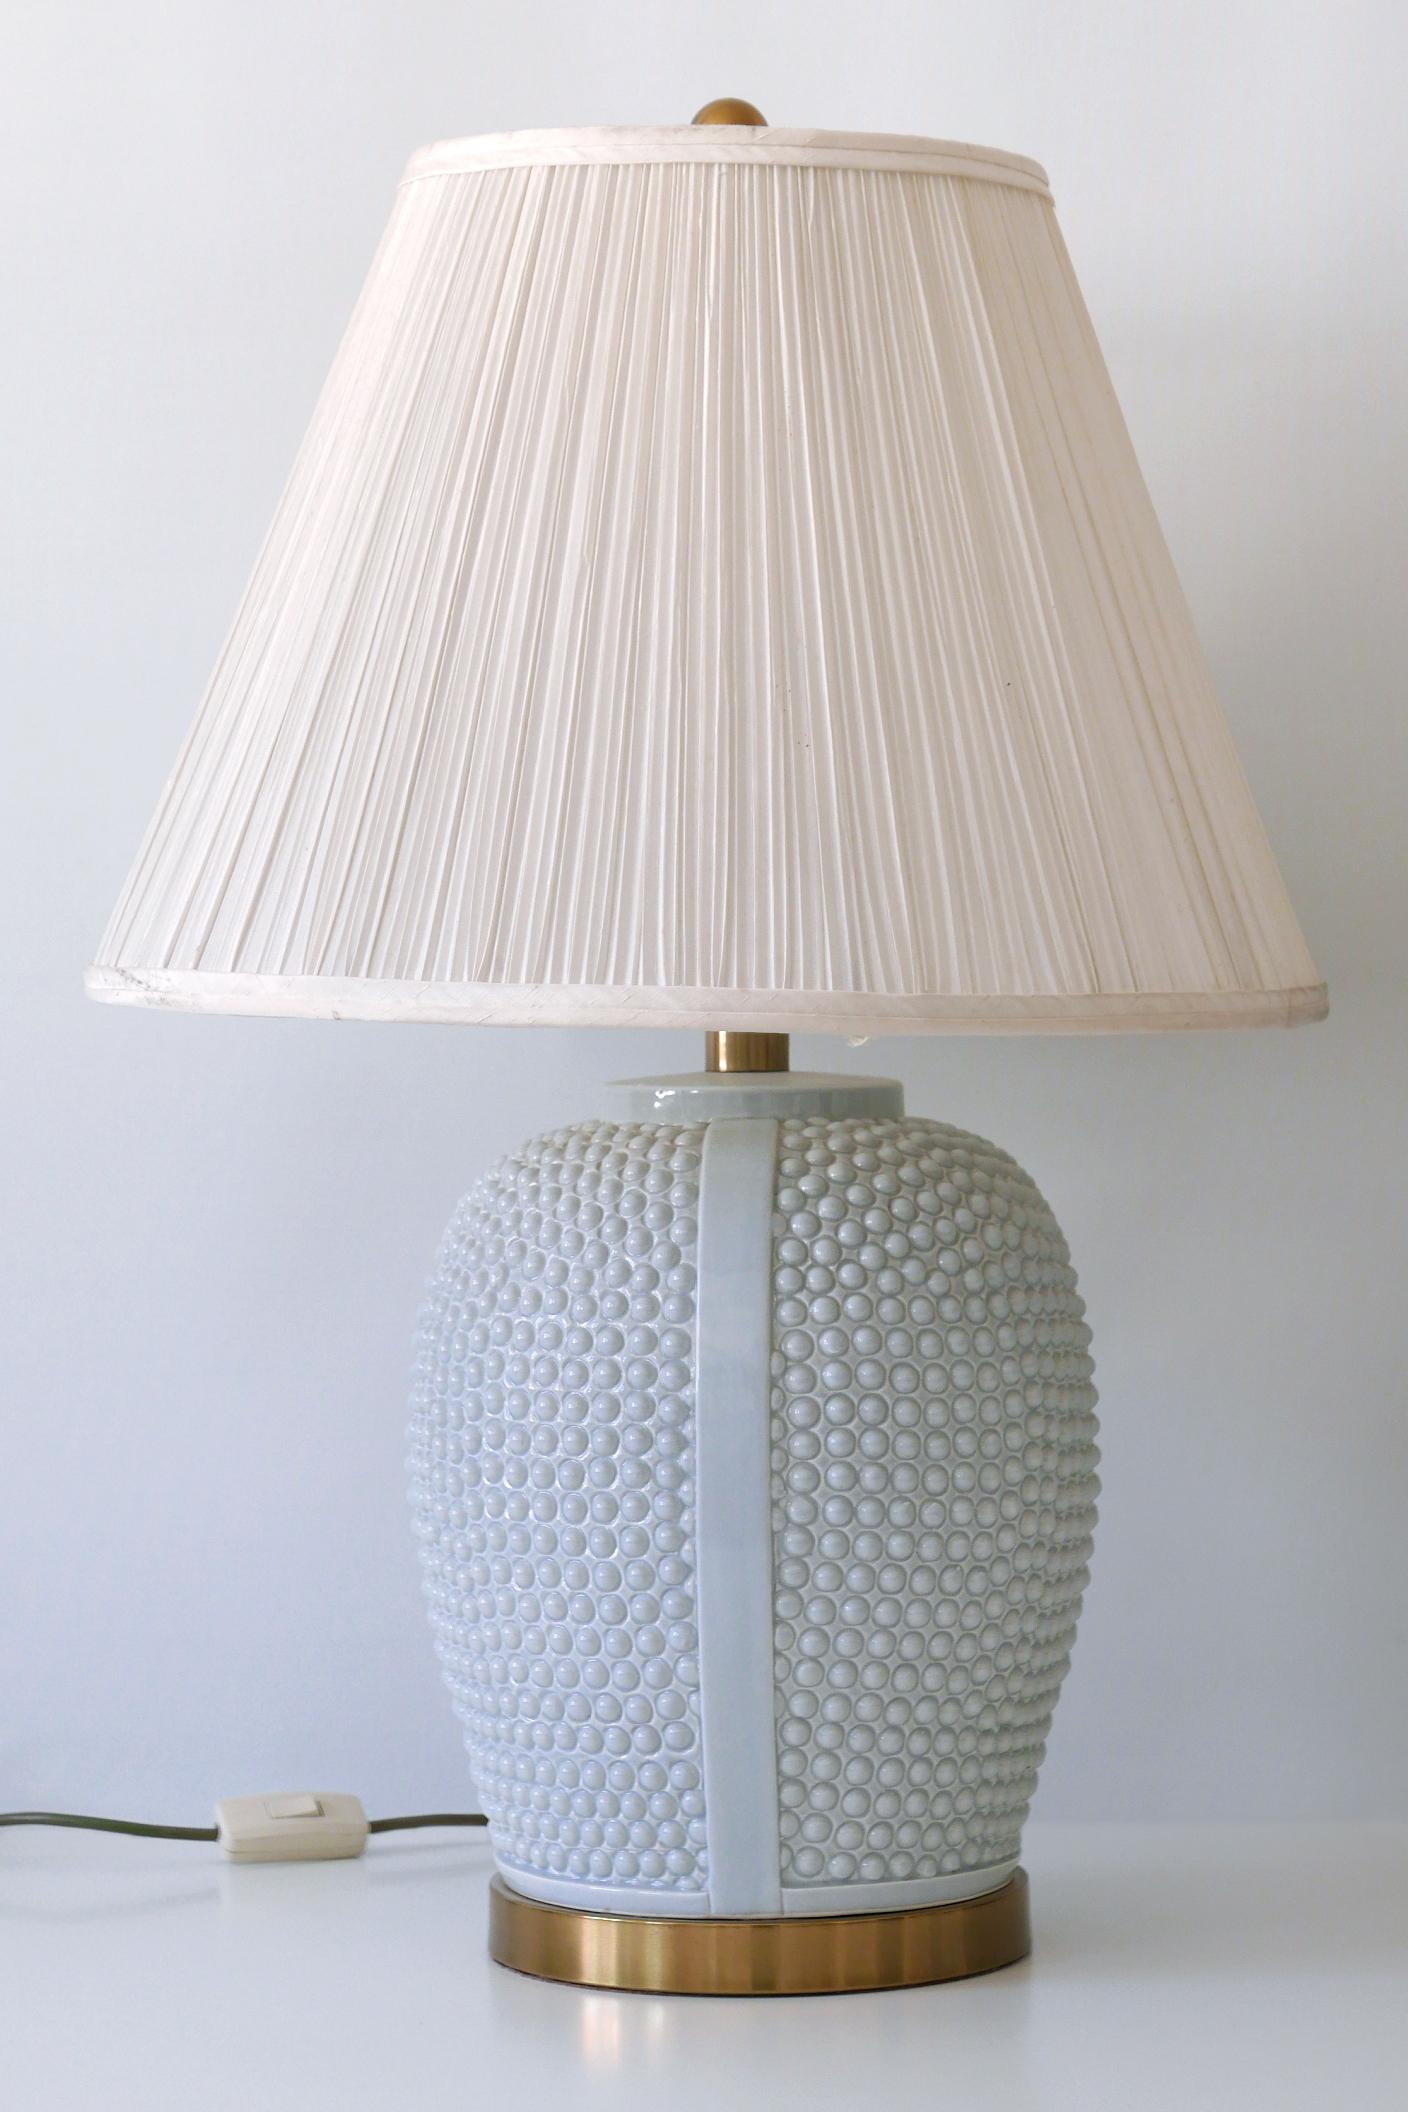 Set of Two Exceptional Mid-Century Modern Ceramic Table Lamps, 1960s, Germany In Good Condition For Sale In Munich, DE